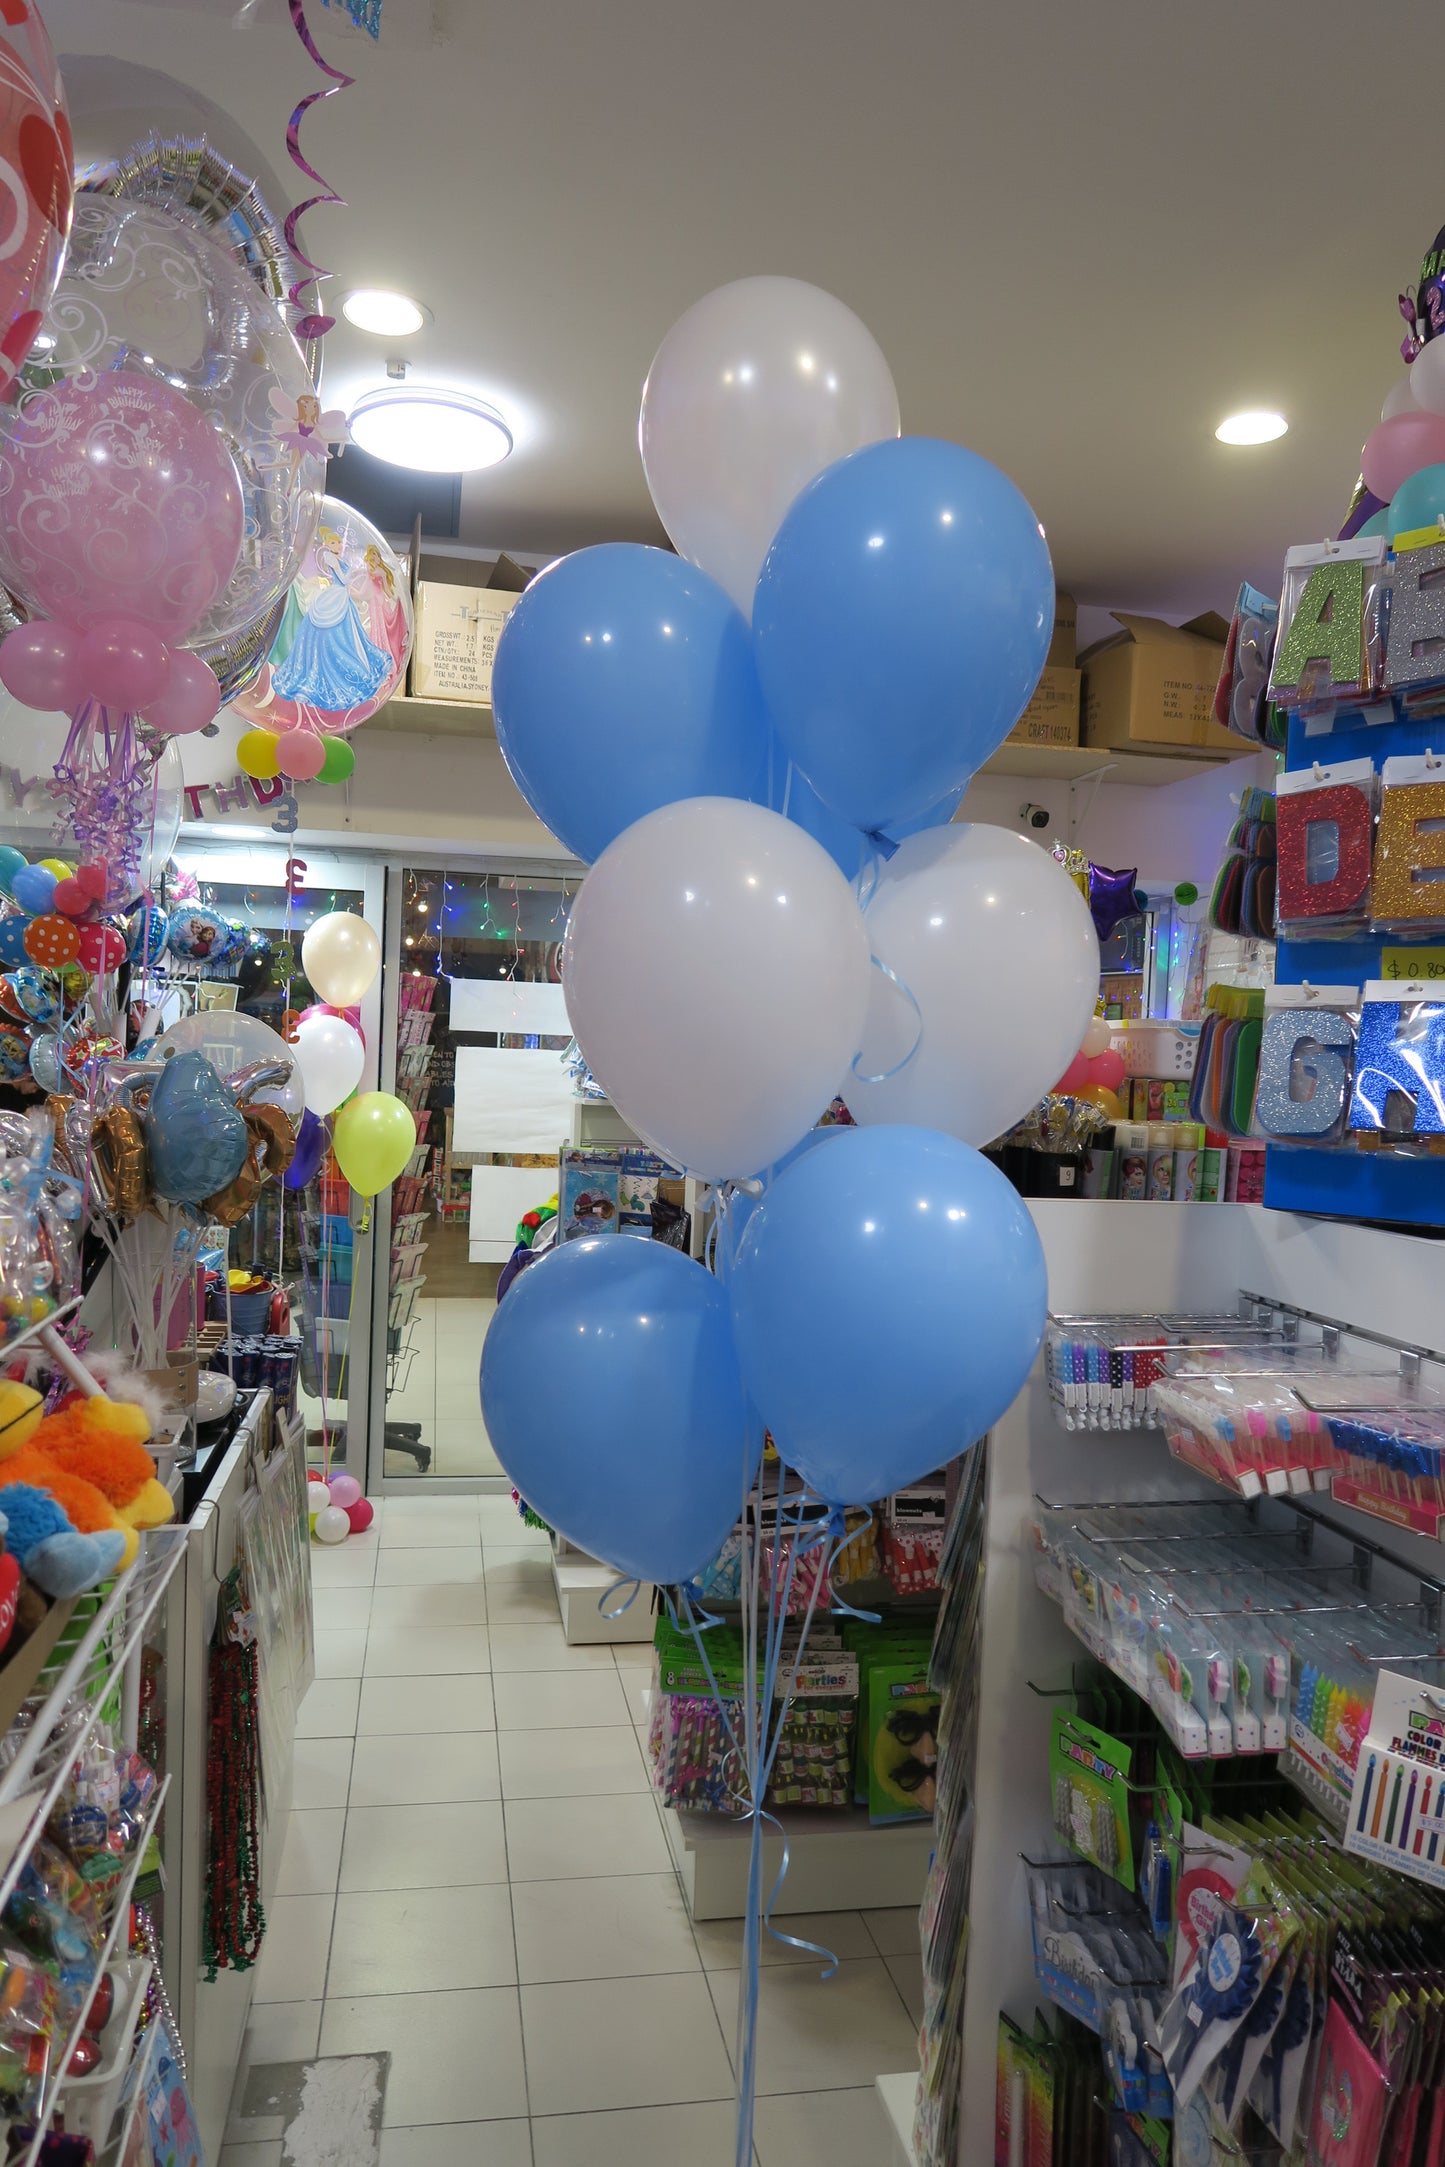 Clear bubble with teddy bear inside and 9 helium balloon bouquet